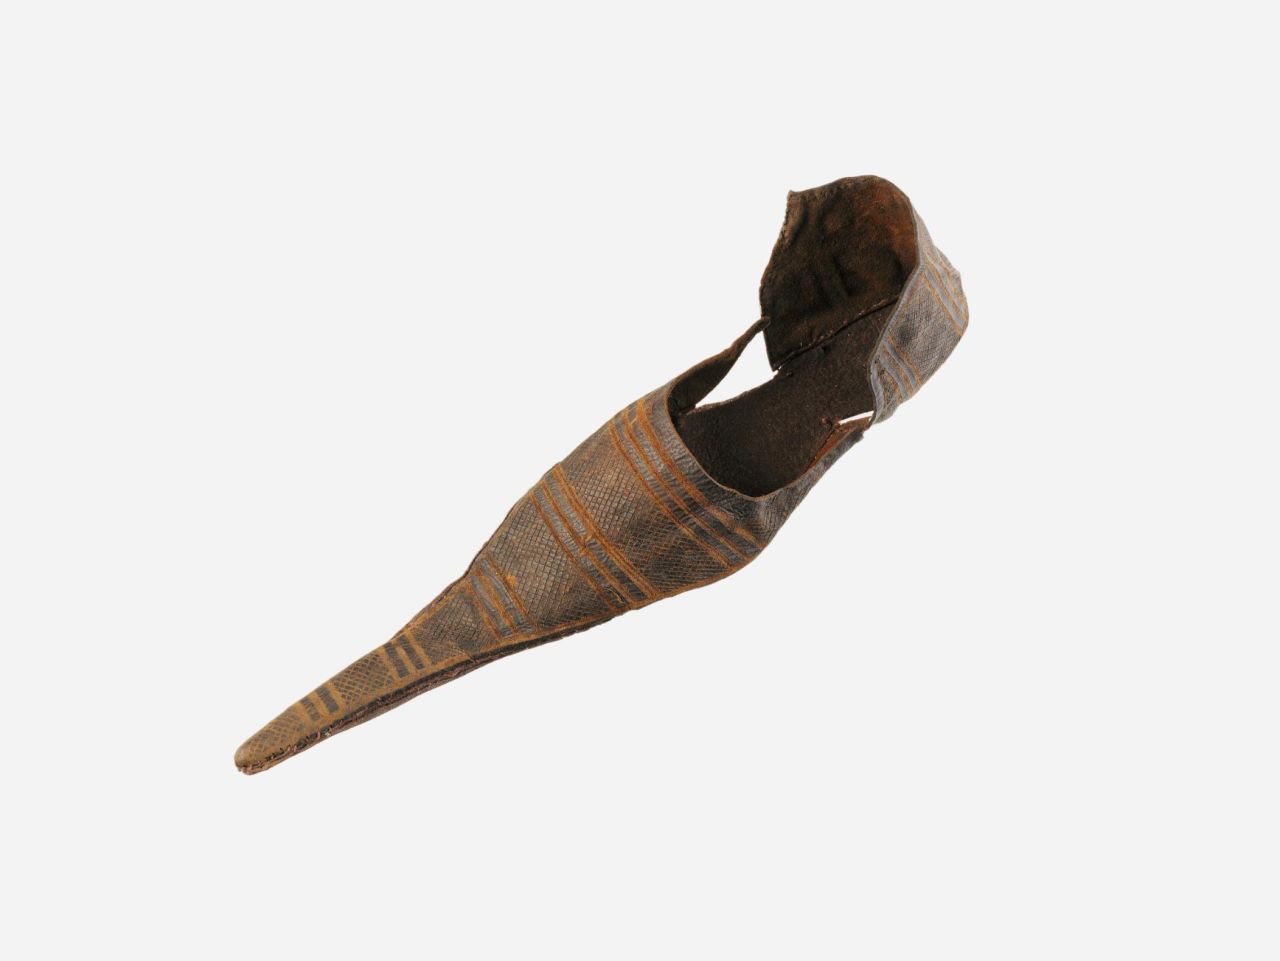 This pointed-toe medieval shoe is known as a poulaine. The artifact dates from the late 14th century and is on display at the Museum of London.